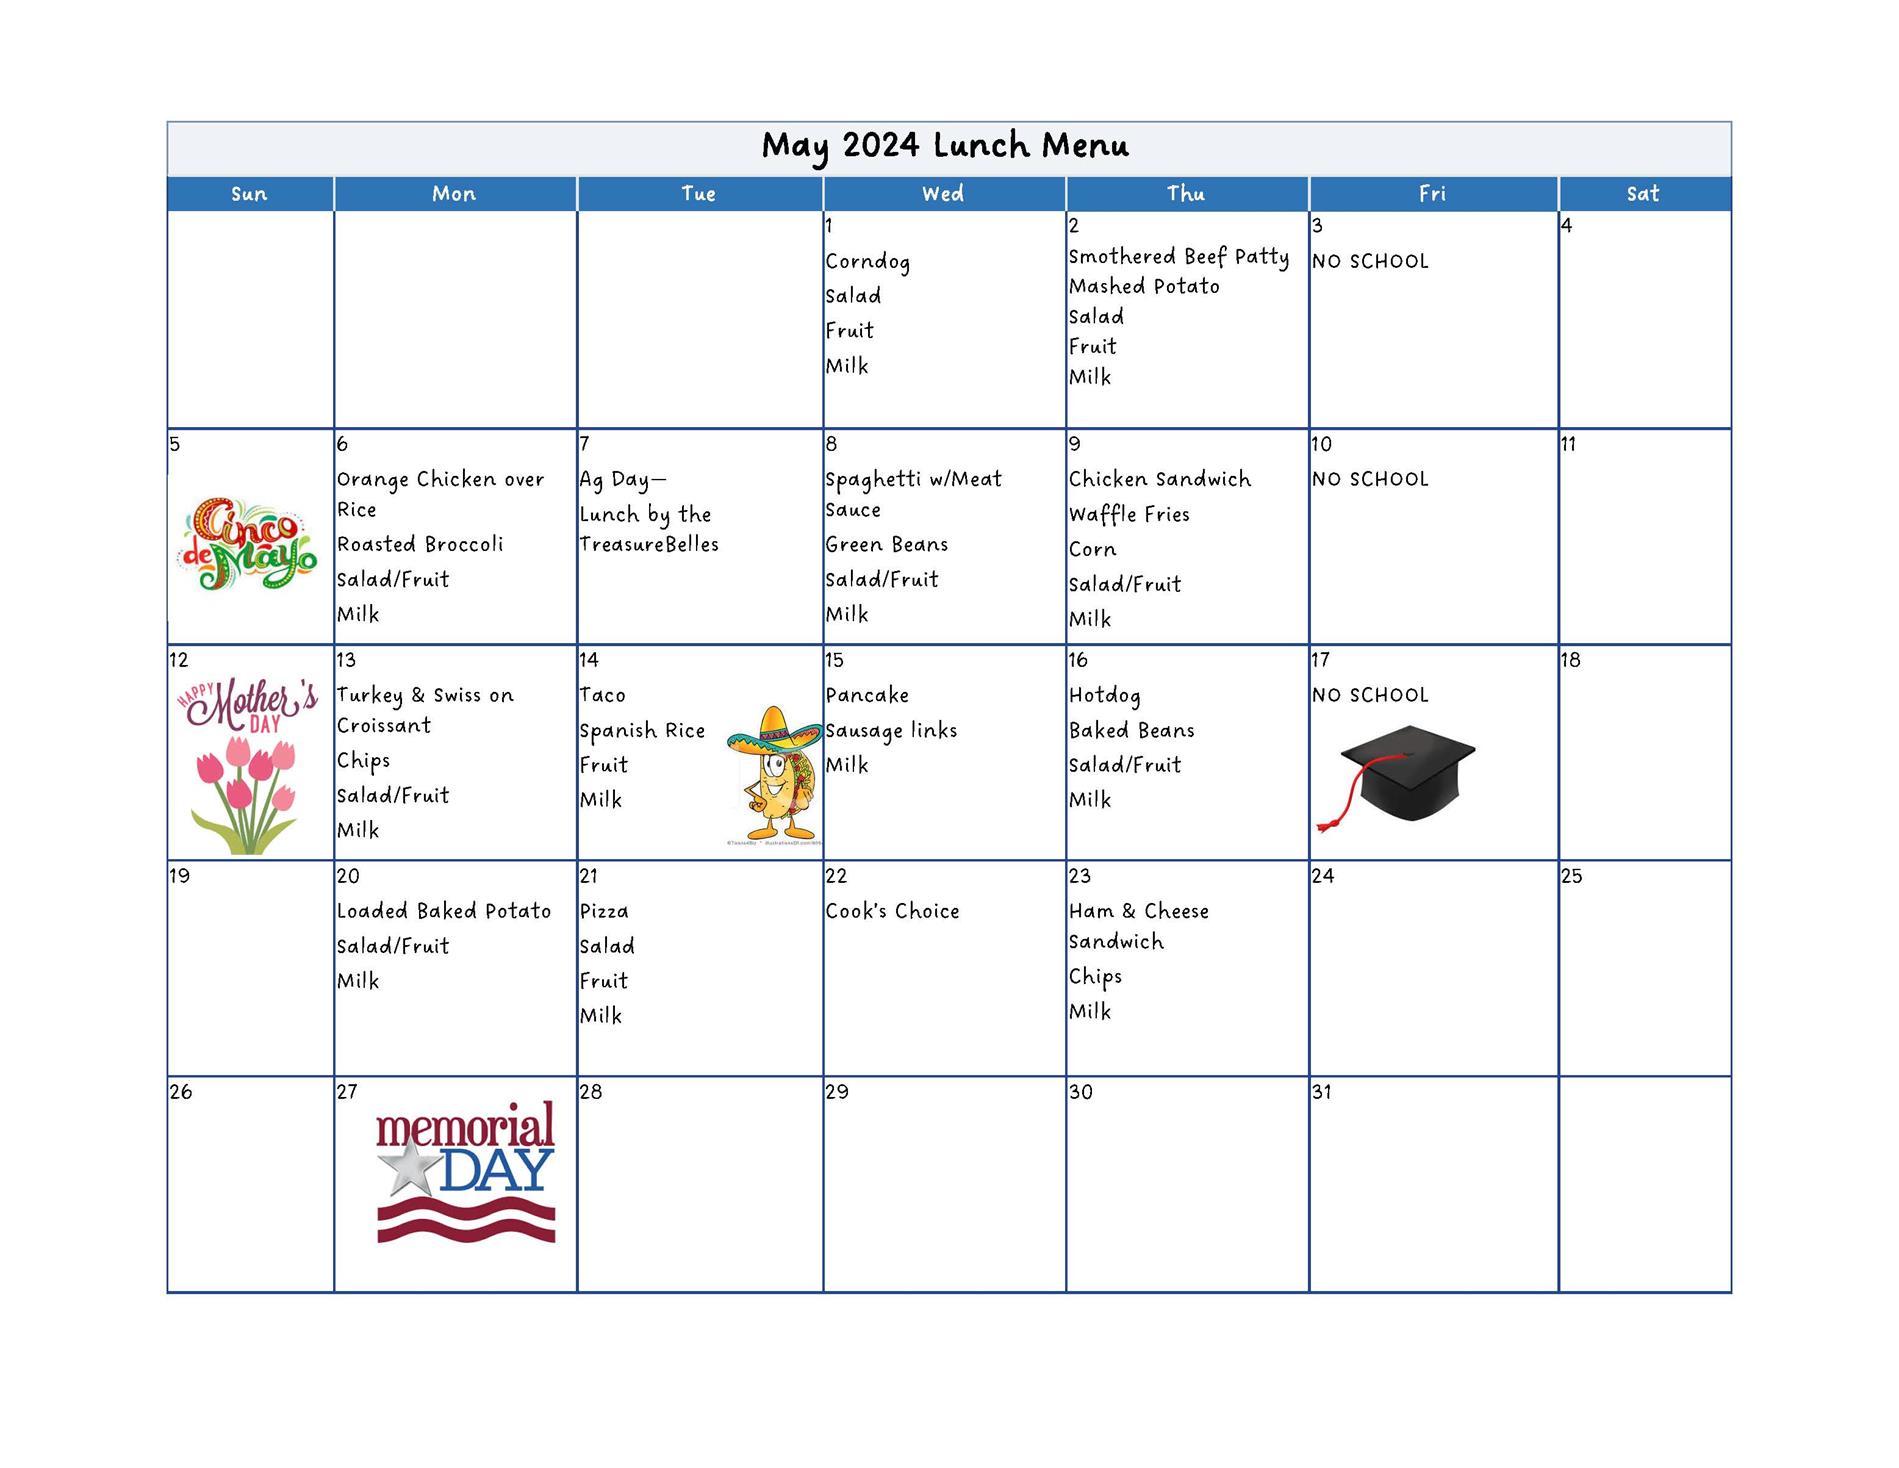 lunch menu for May 2024